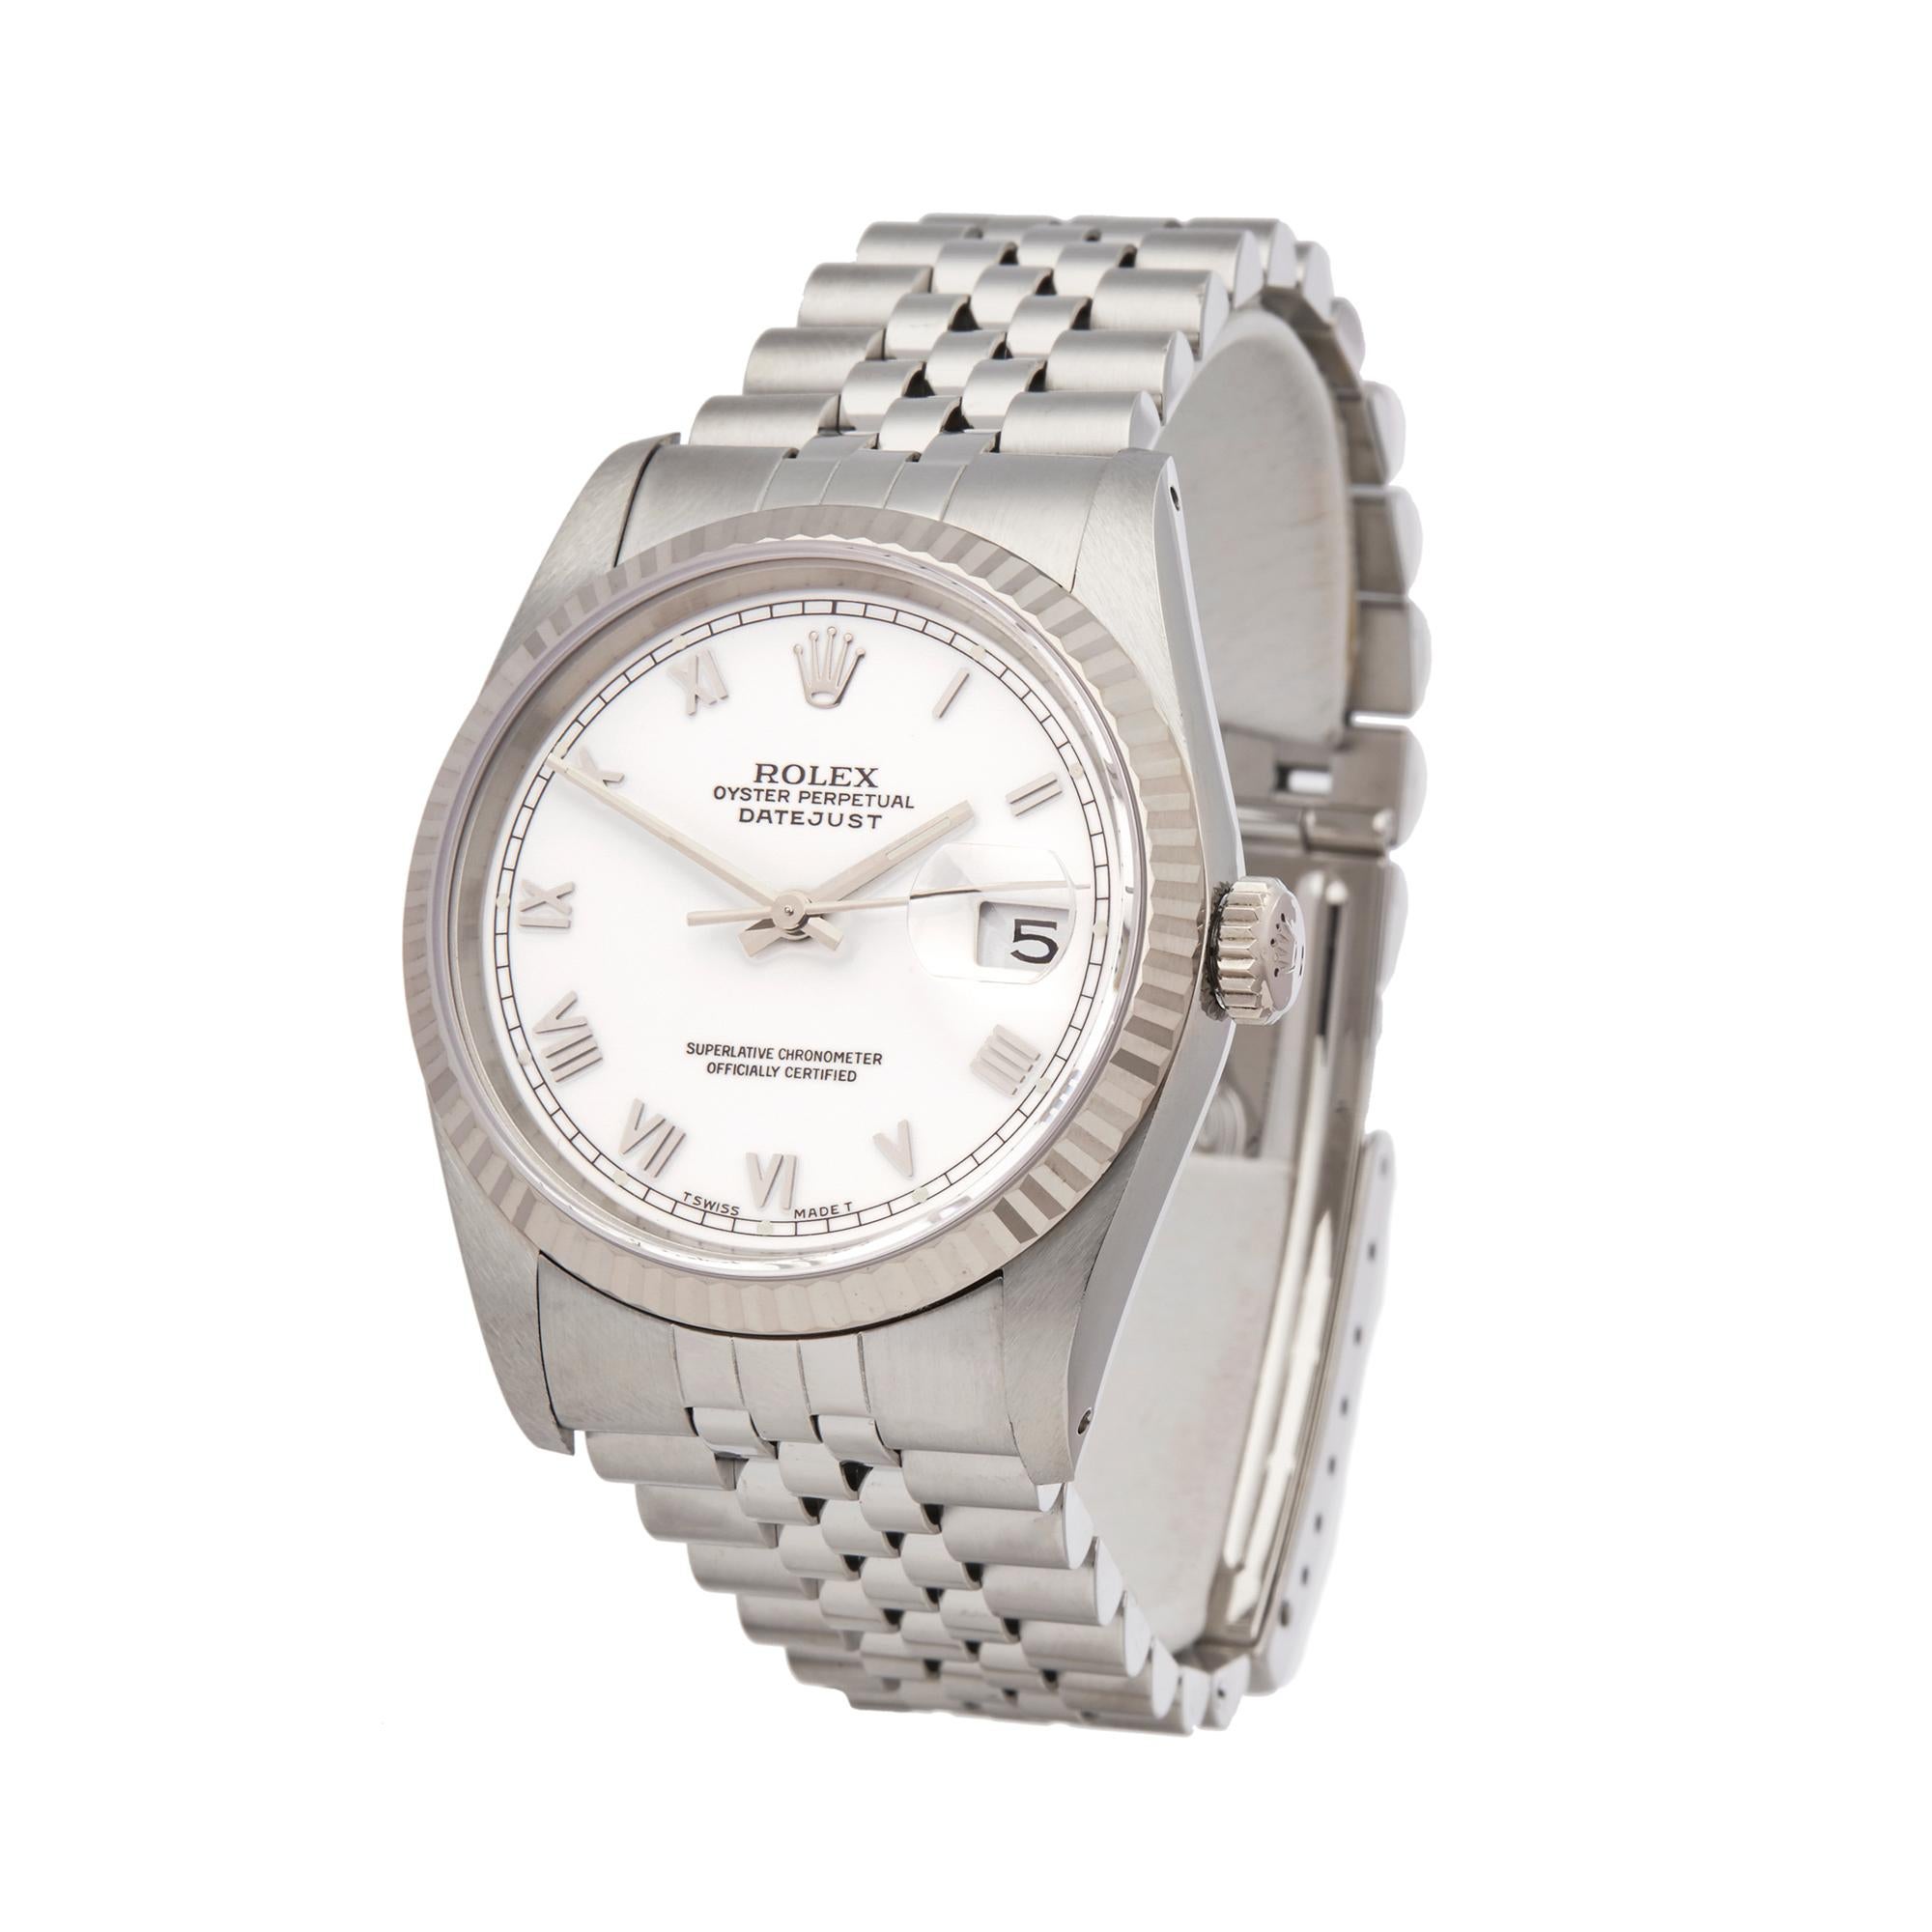 Reference: W5726
Manufacturer: Rolex
Model: Datejust
Model Reference: 16234
Age: Circa 1990
Gender: Men's
Box and Papers: Box Only
Dial: White Roman
Glass: Sapphire Crystal
Movement: Automatic
Water Resistance: To Manufacturers Specifications
Case: